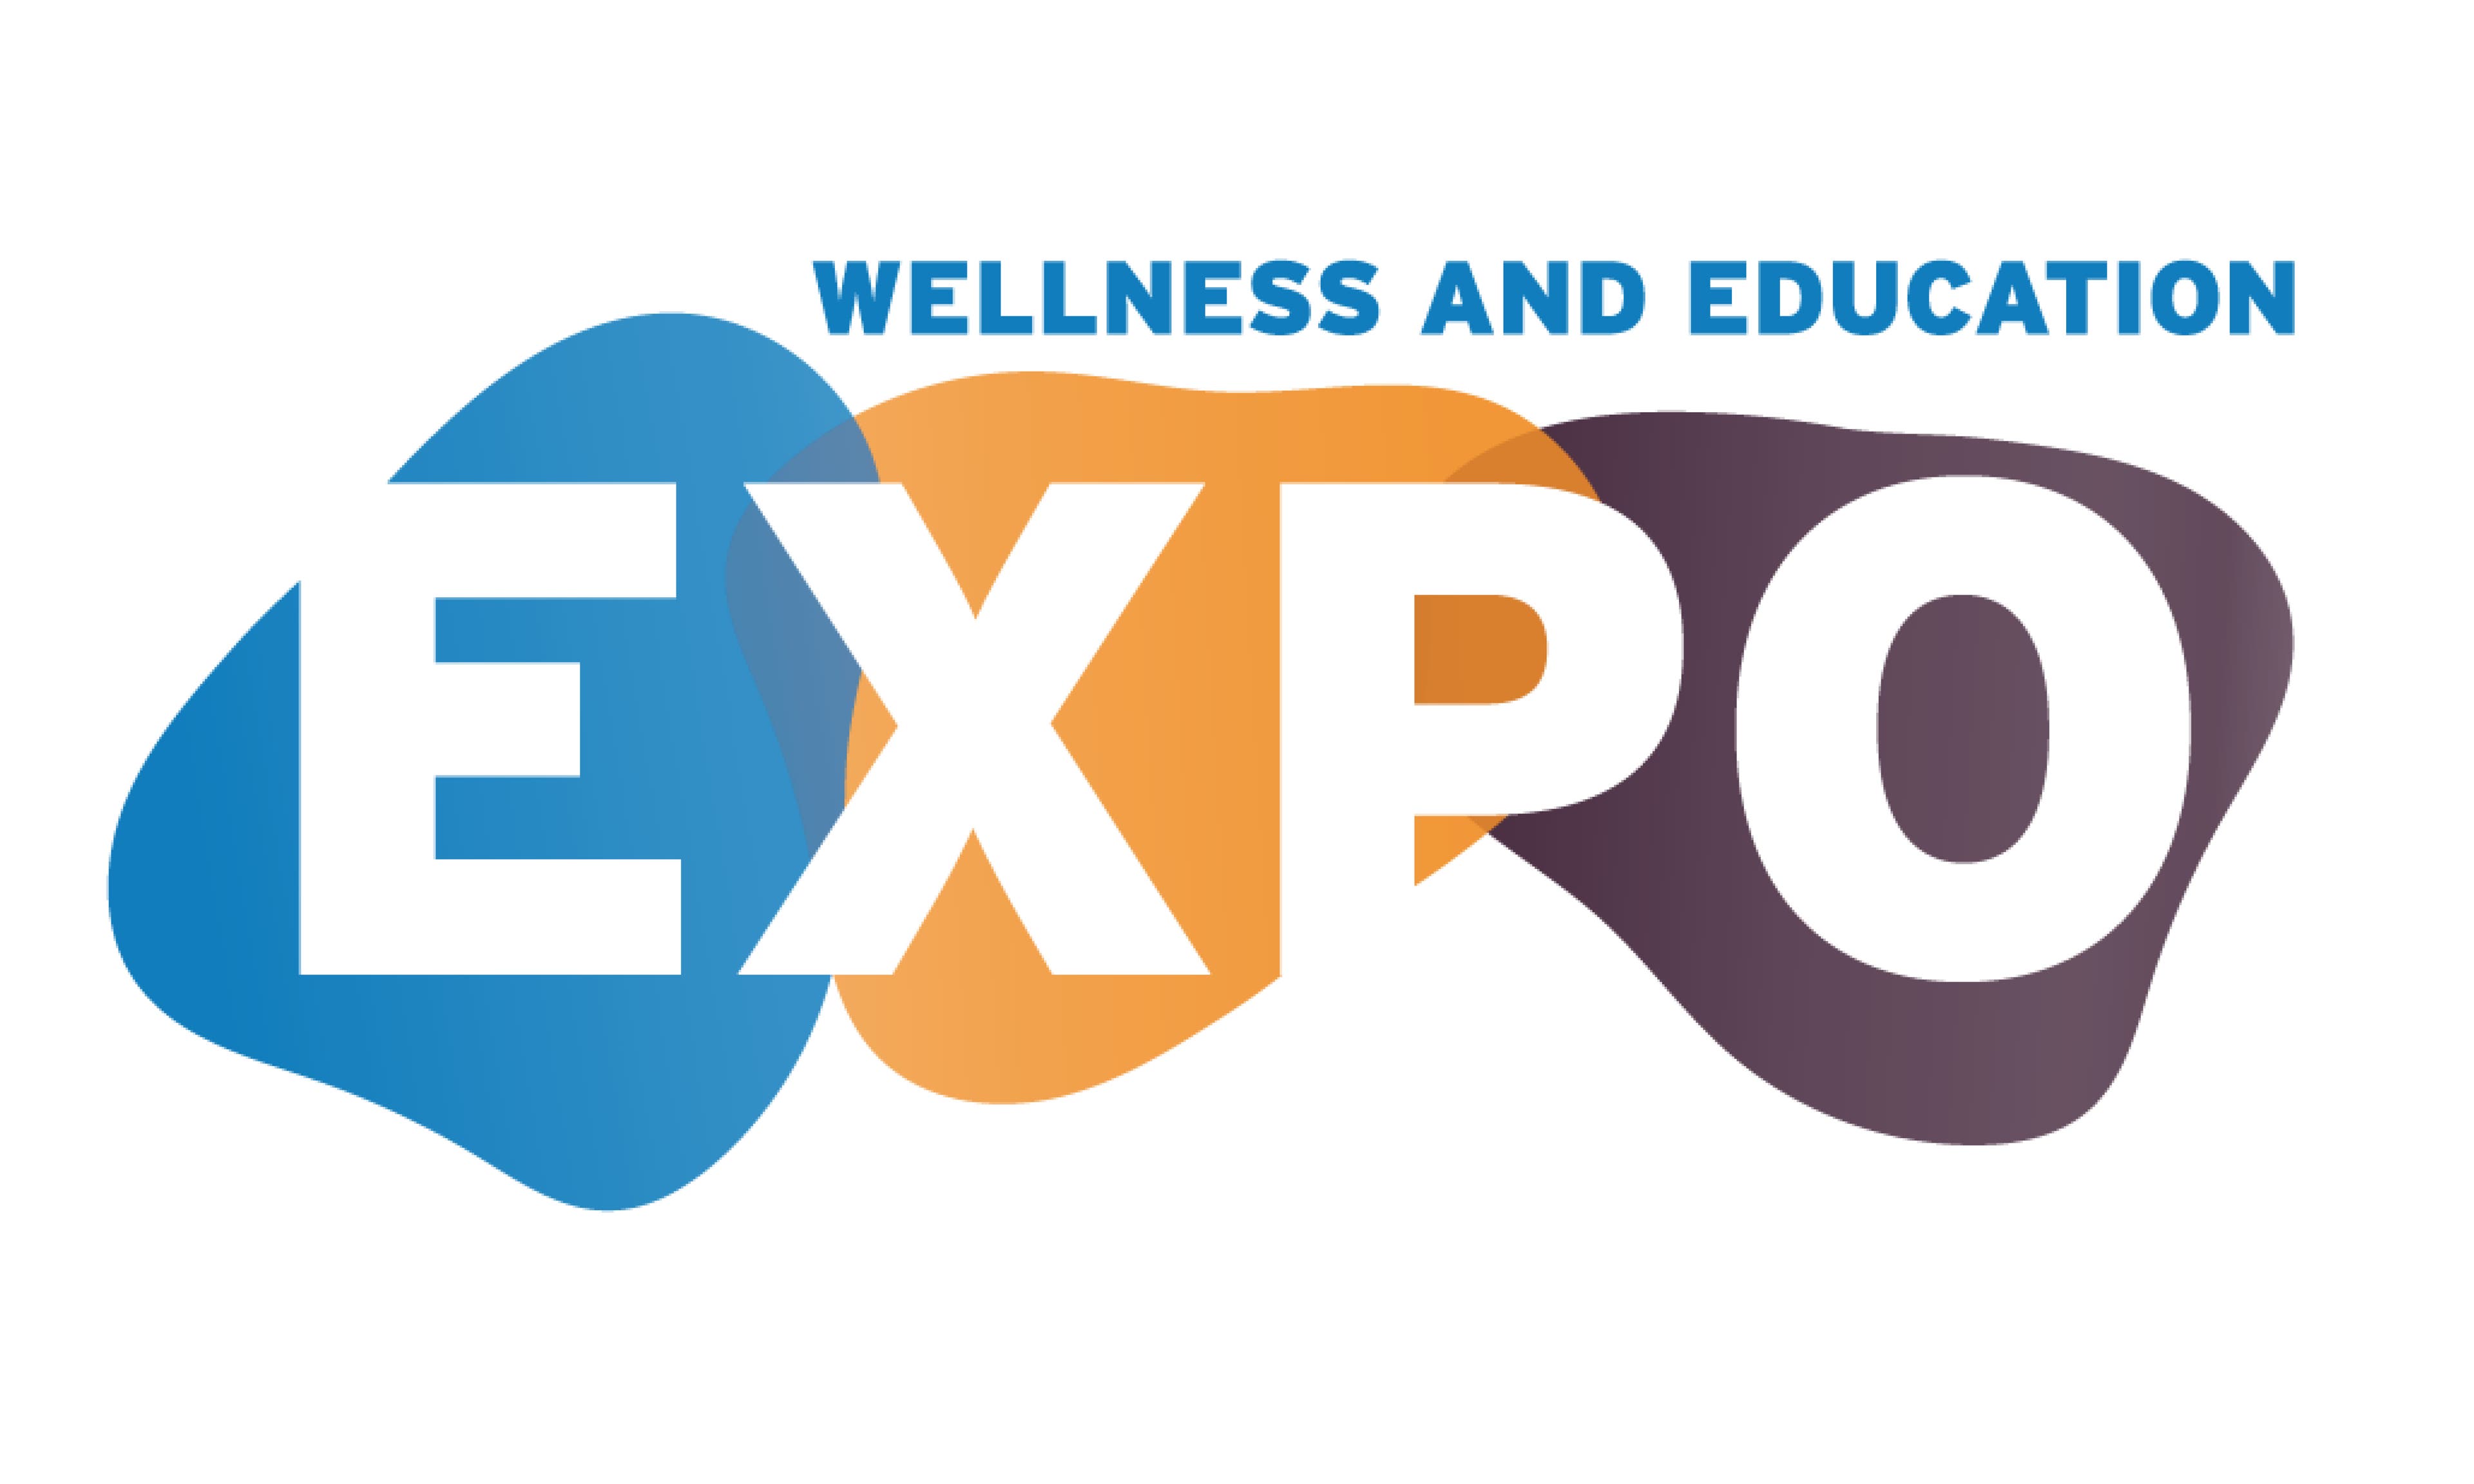 SEL hosts annual Wellness and Education Expo